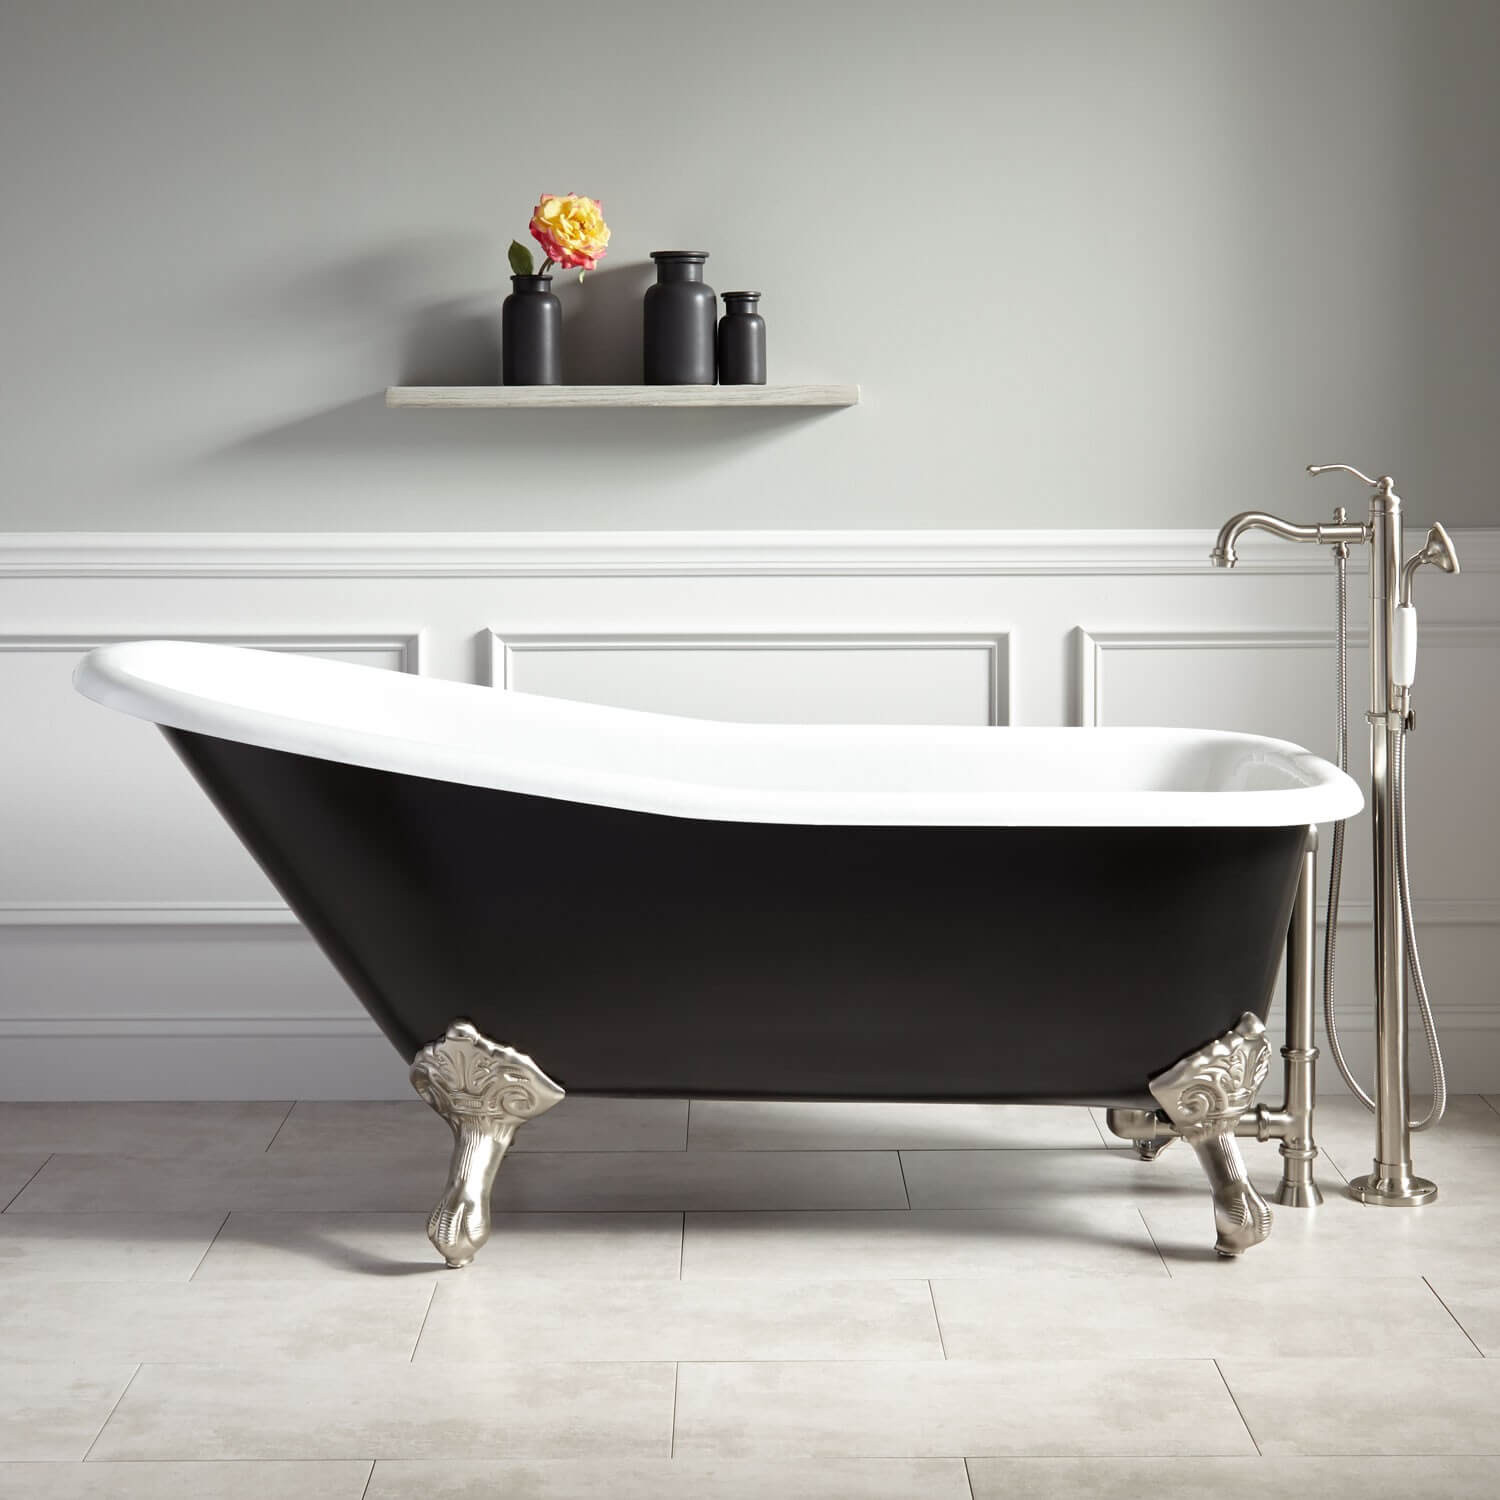 Bathroom Tub Paint
 How to Paint Bathtub Easily TheyDesign TheyDesign